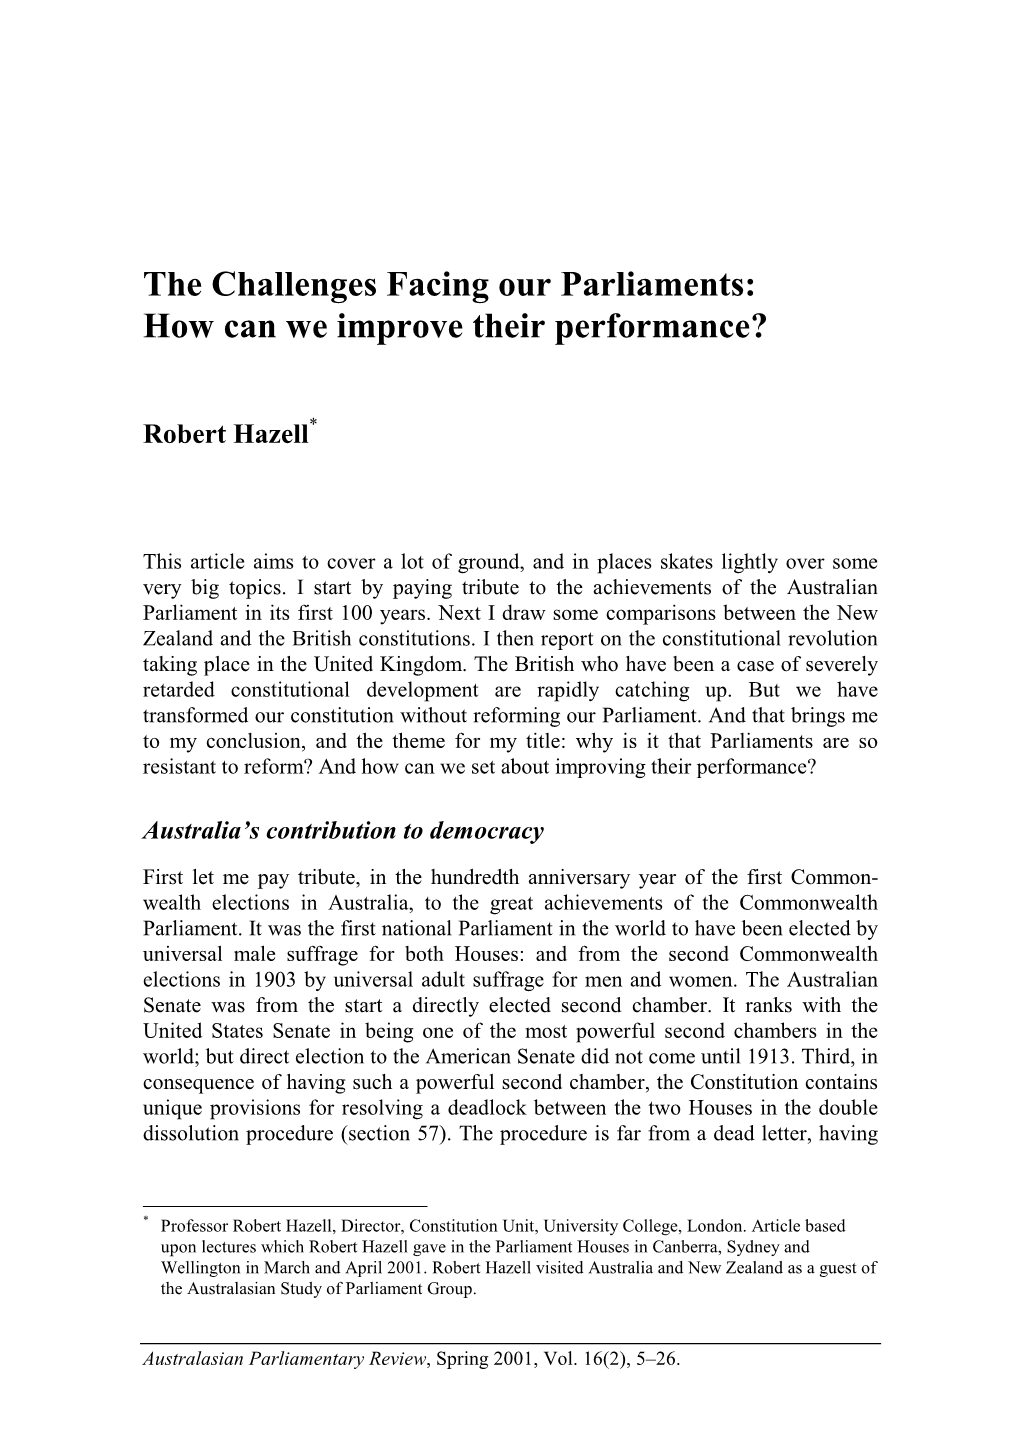 The Challenges Facing Our Parliaments: How Can We Improve Their Performance?